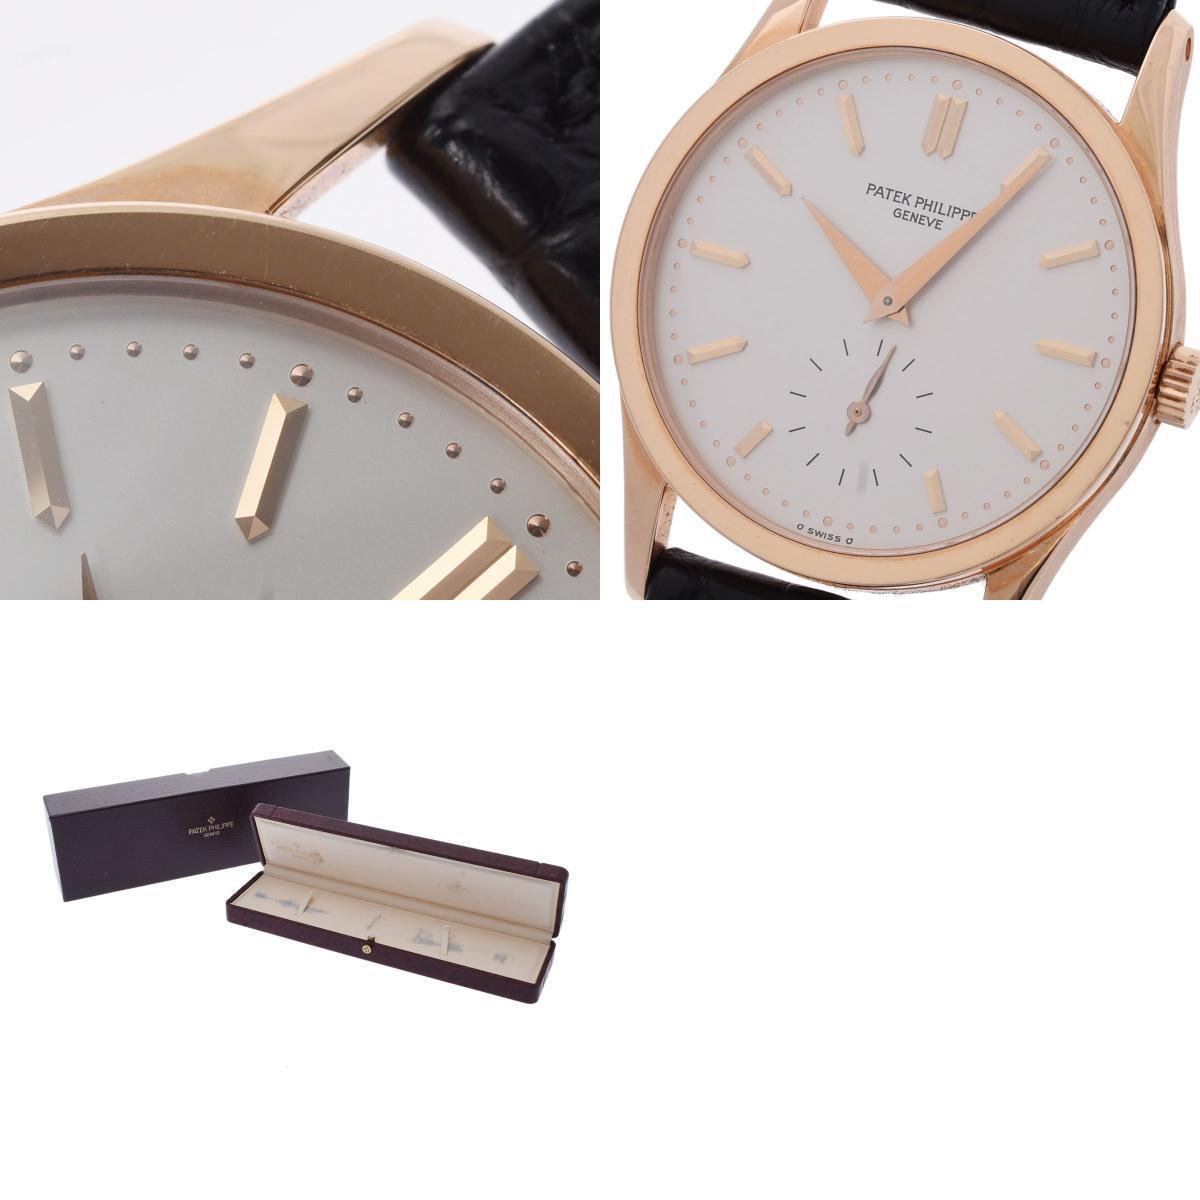 Patek Philippe Calatrava 3796R-014 Boys RG/Leather Watch Manual Winding Silver Dial A Rank Used Ginzo Storehouse - Murphy Johnson Watches Co.